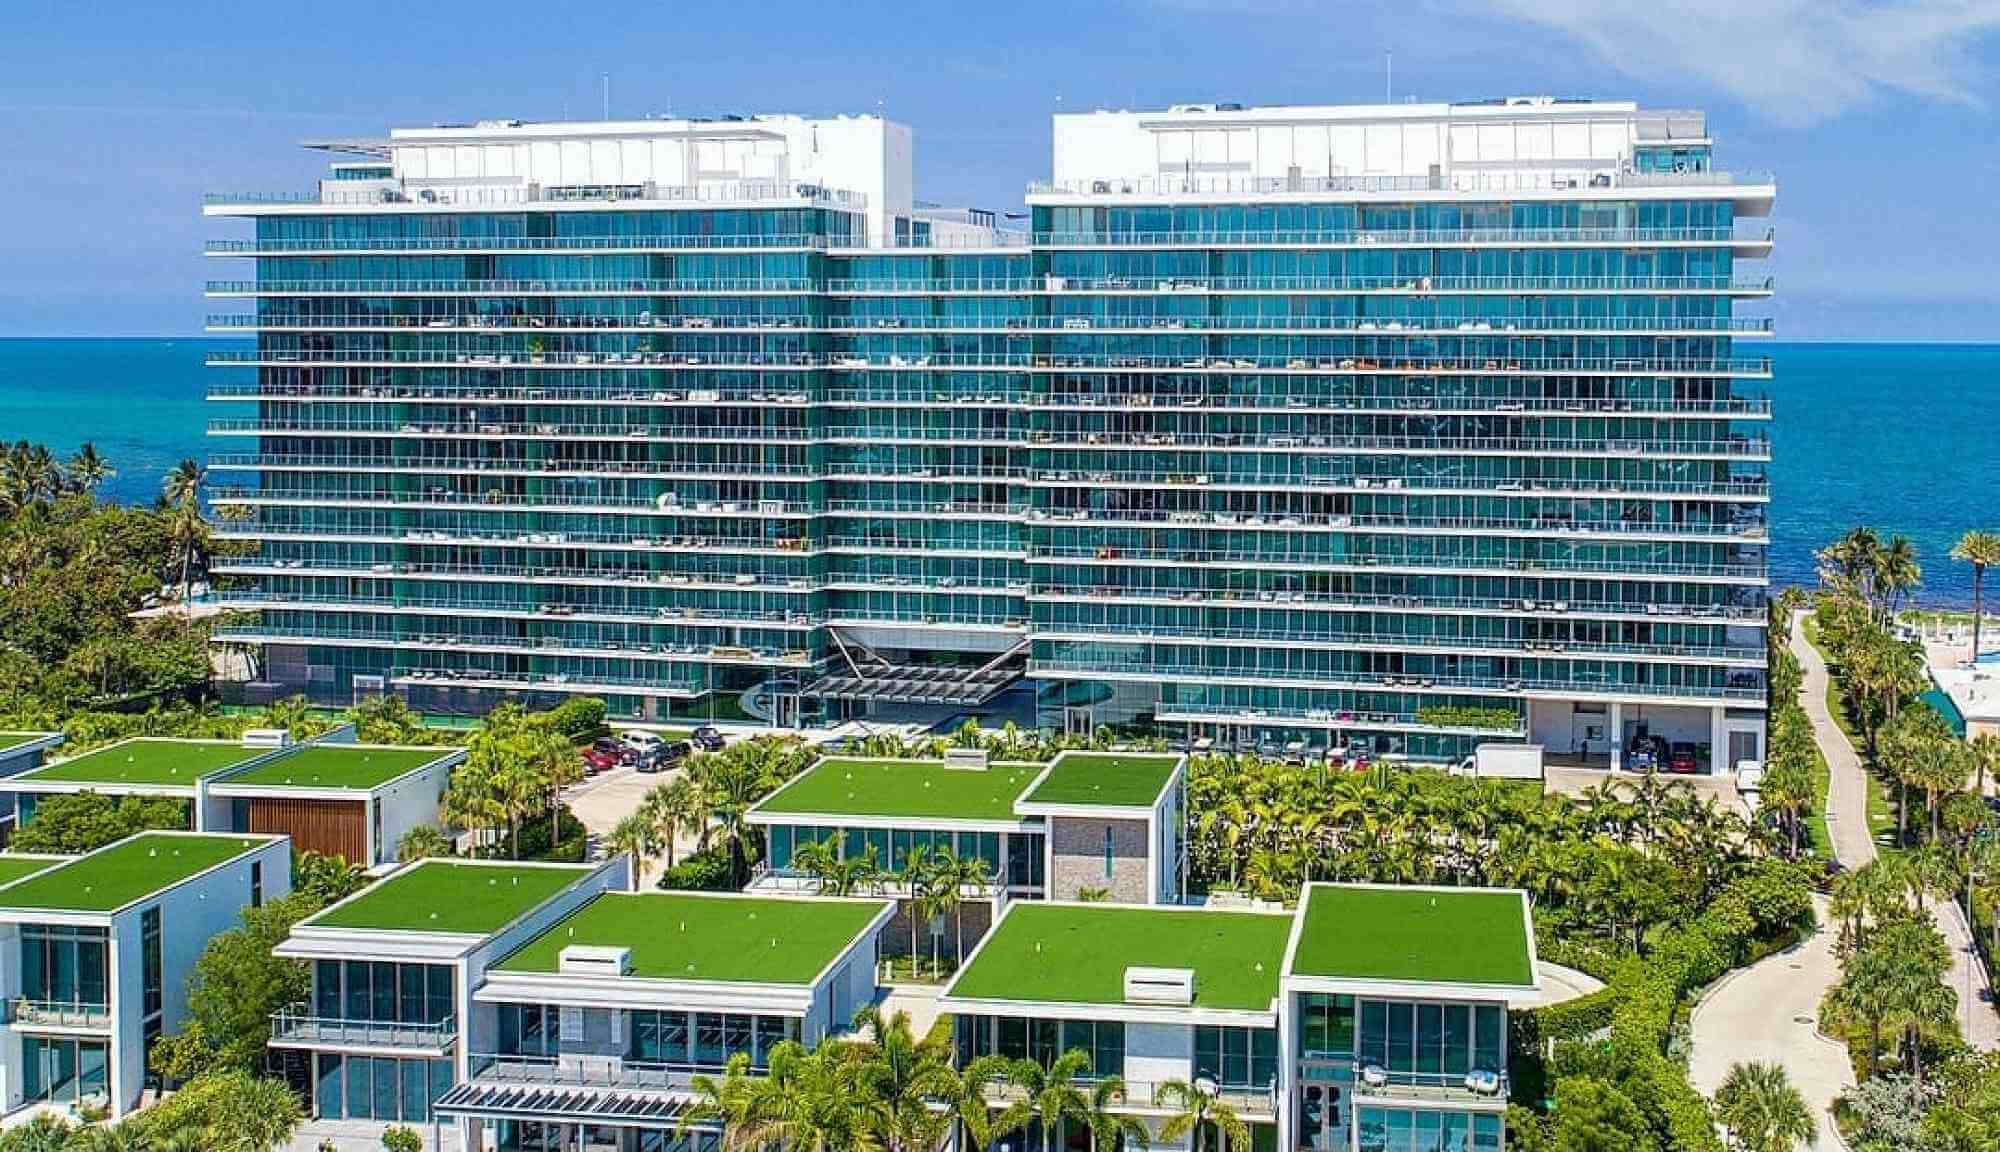 Key Biscayne Roof Tops 60,000sqft of roof tops installed